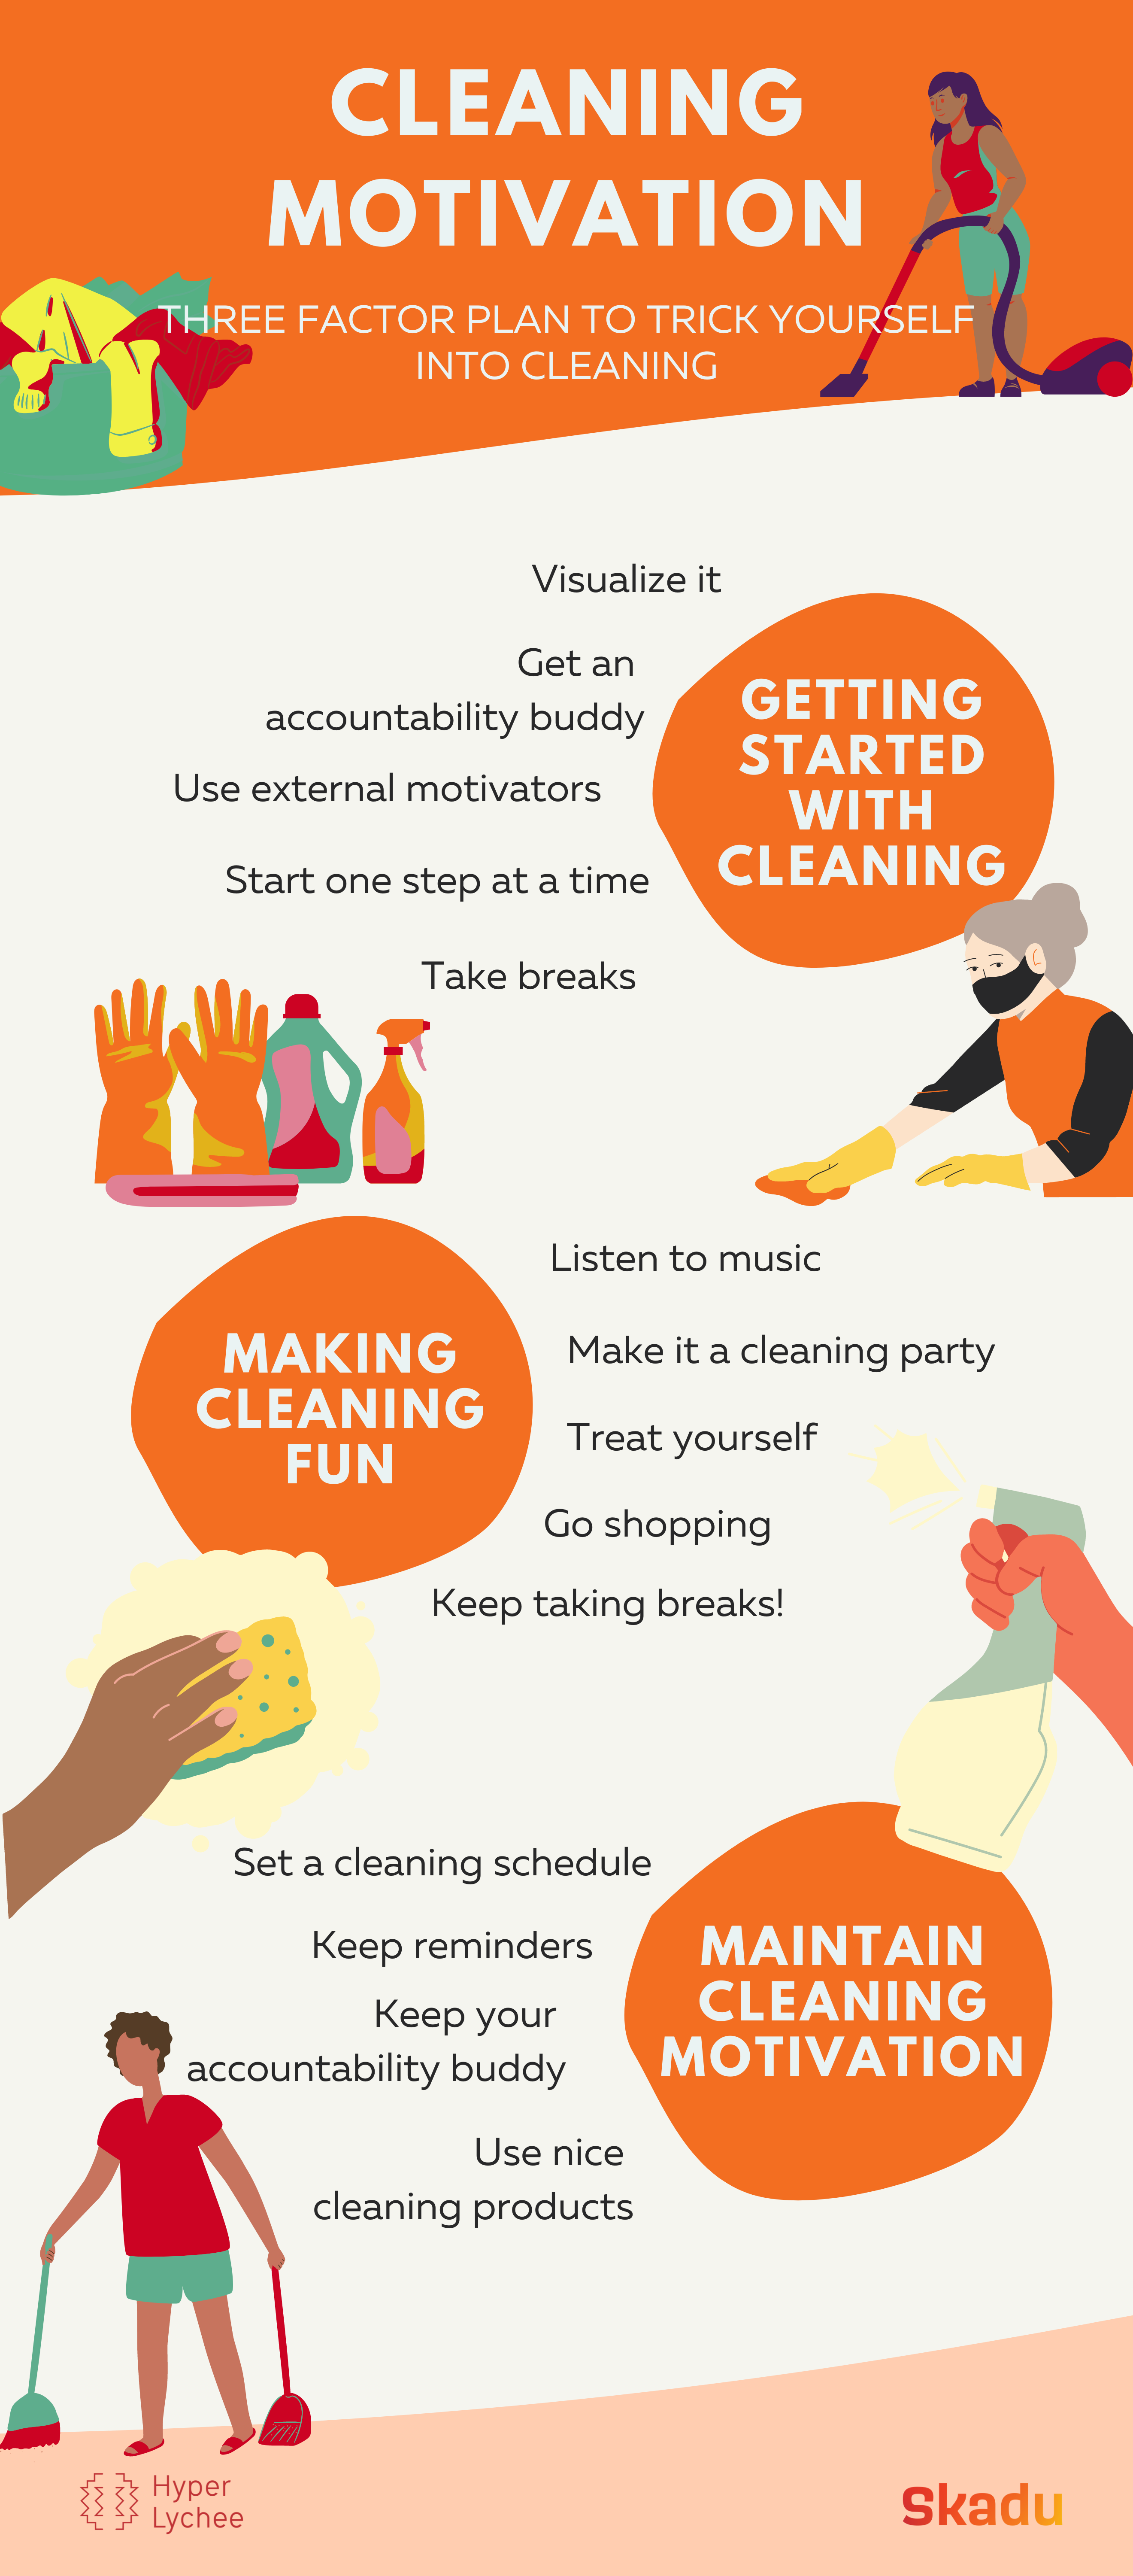 Cleaning Motivation: Where and How Can I Find Some? | Hyper Lychee